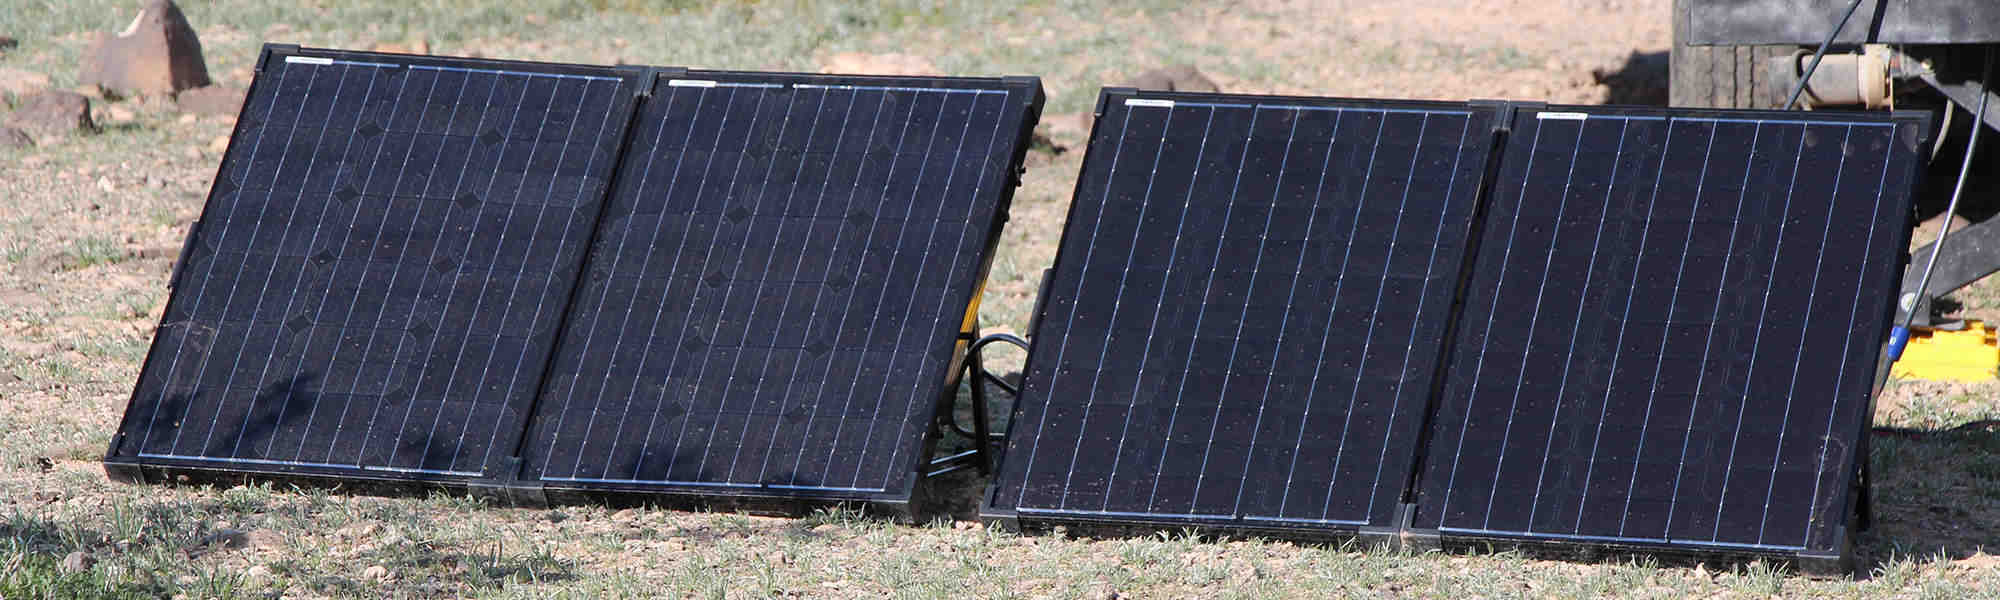 Are solar panels for an RV worth it?